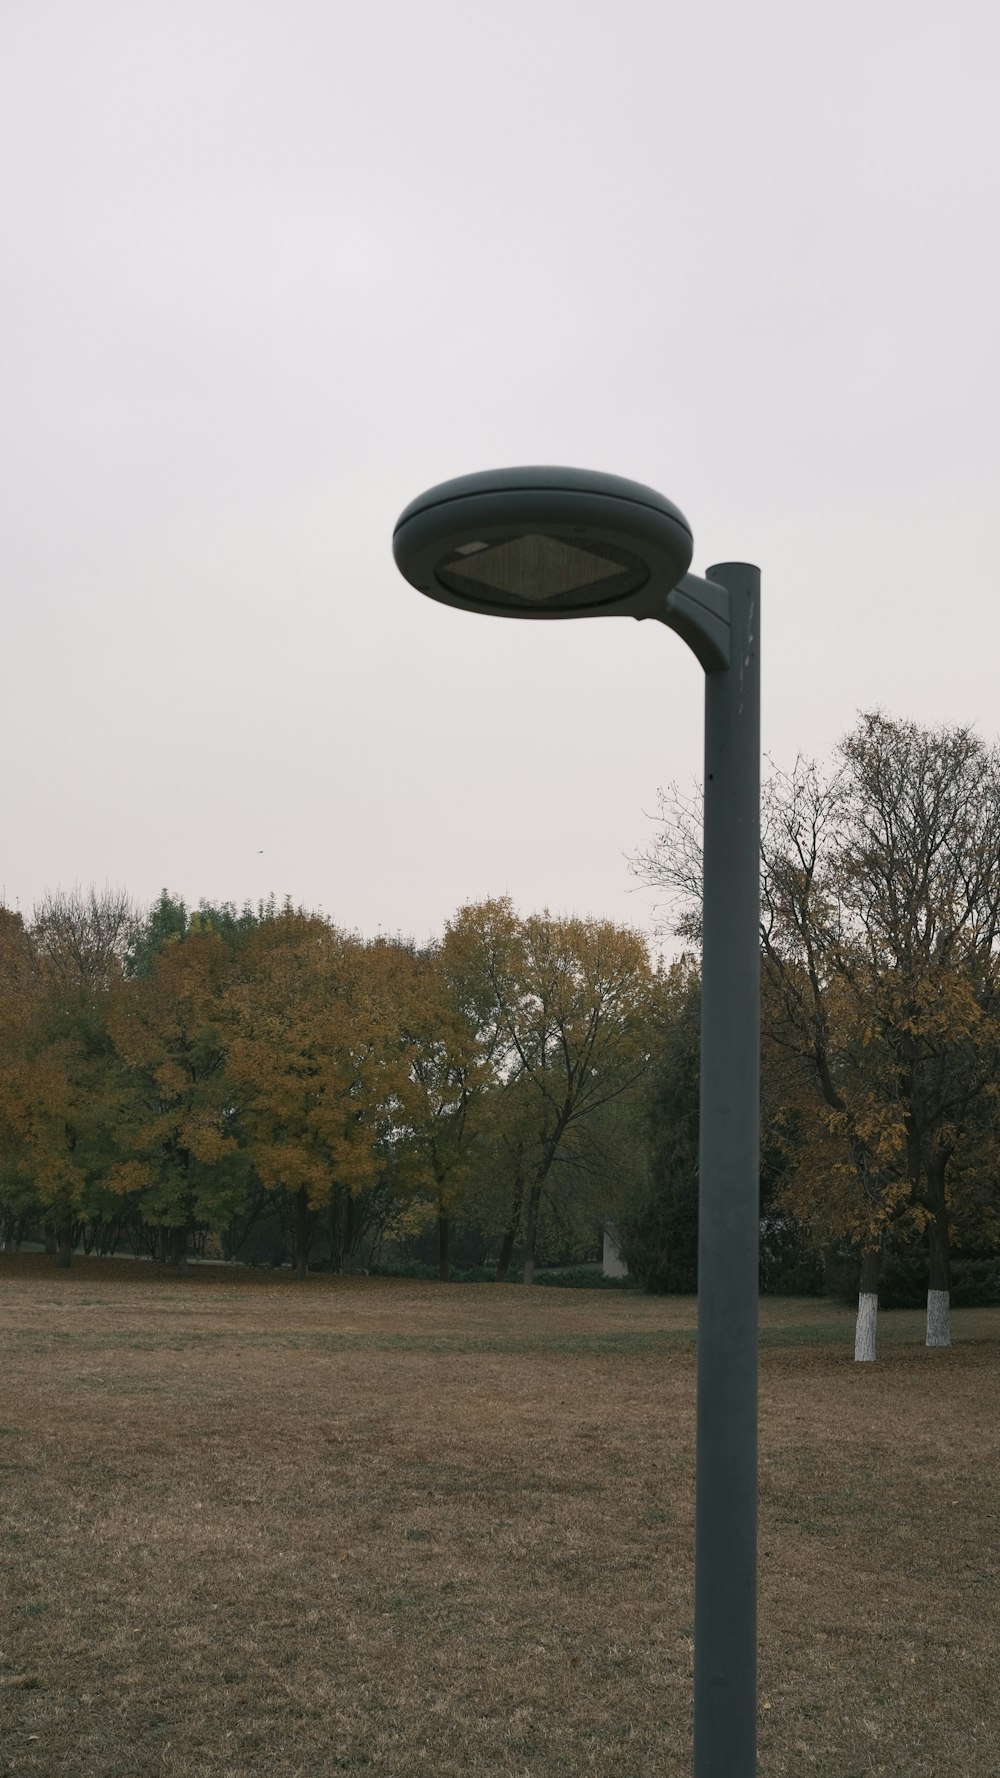 a metal pole with a metal frame and trees in the background